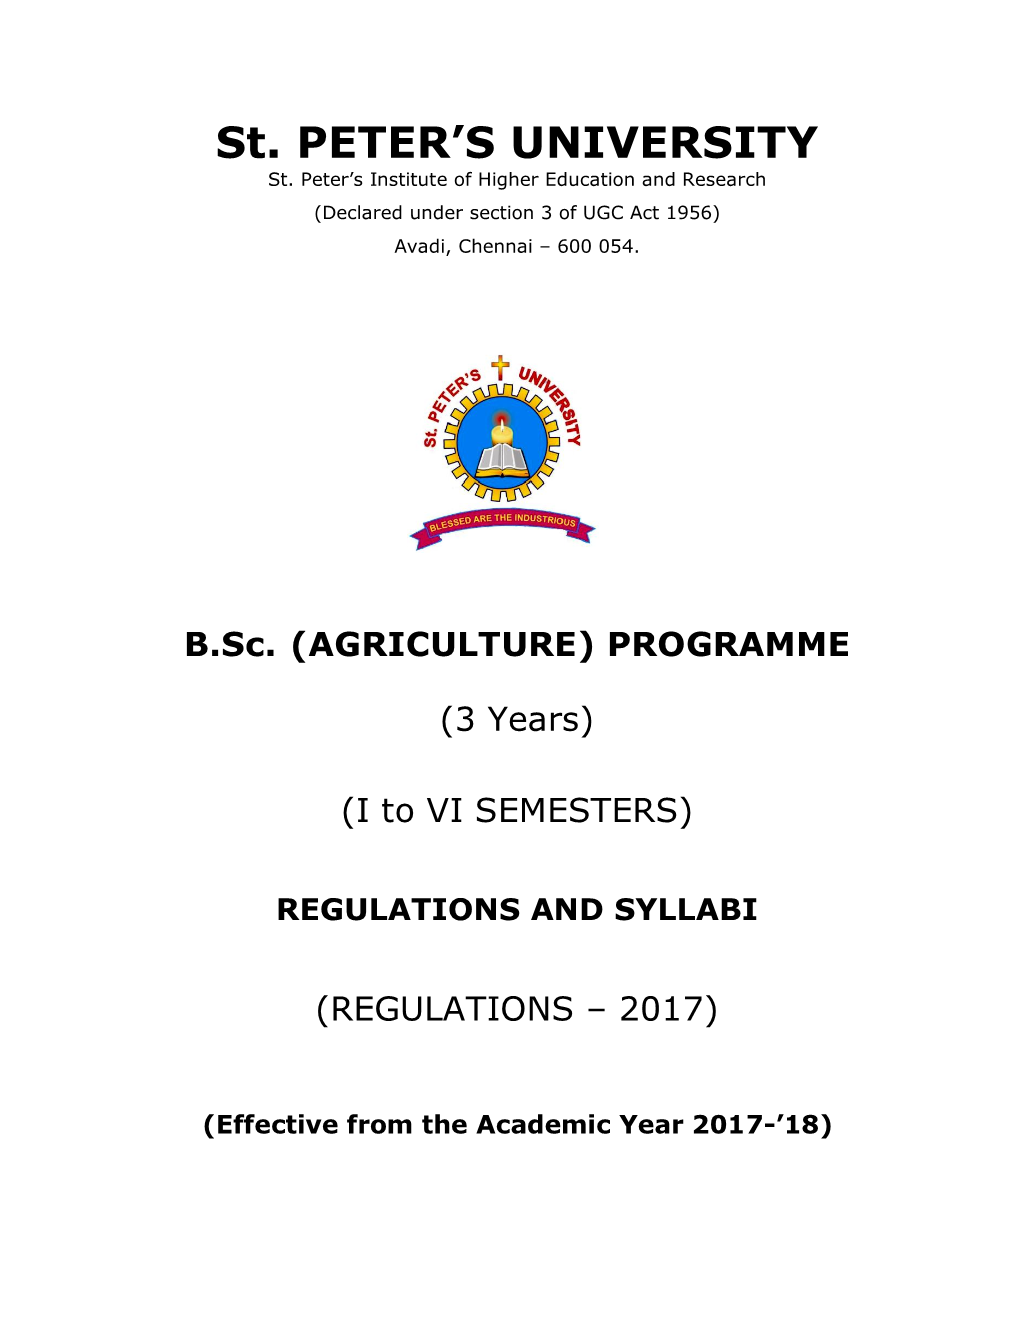 Agriculture) Programme